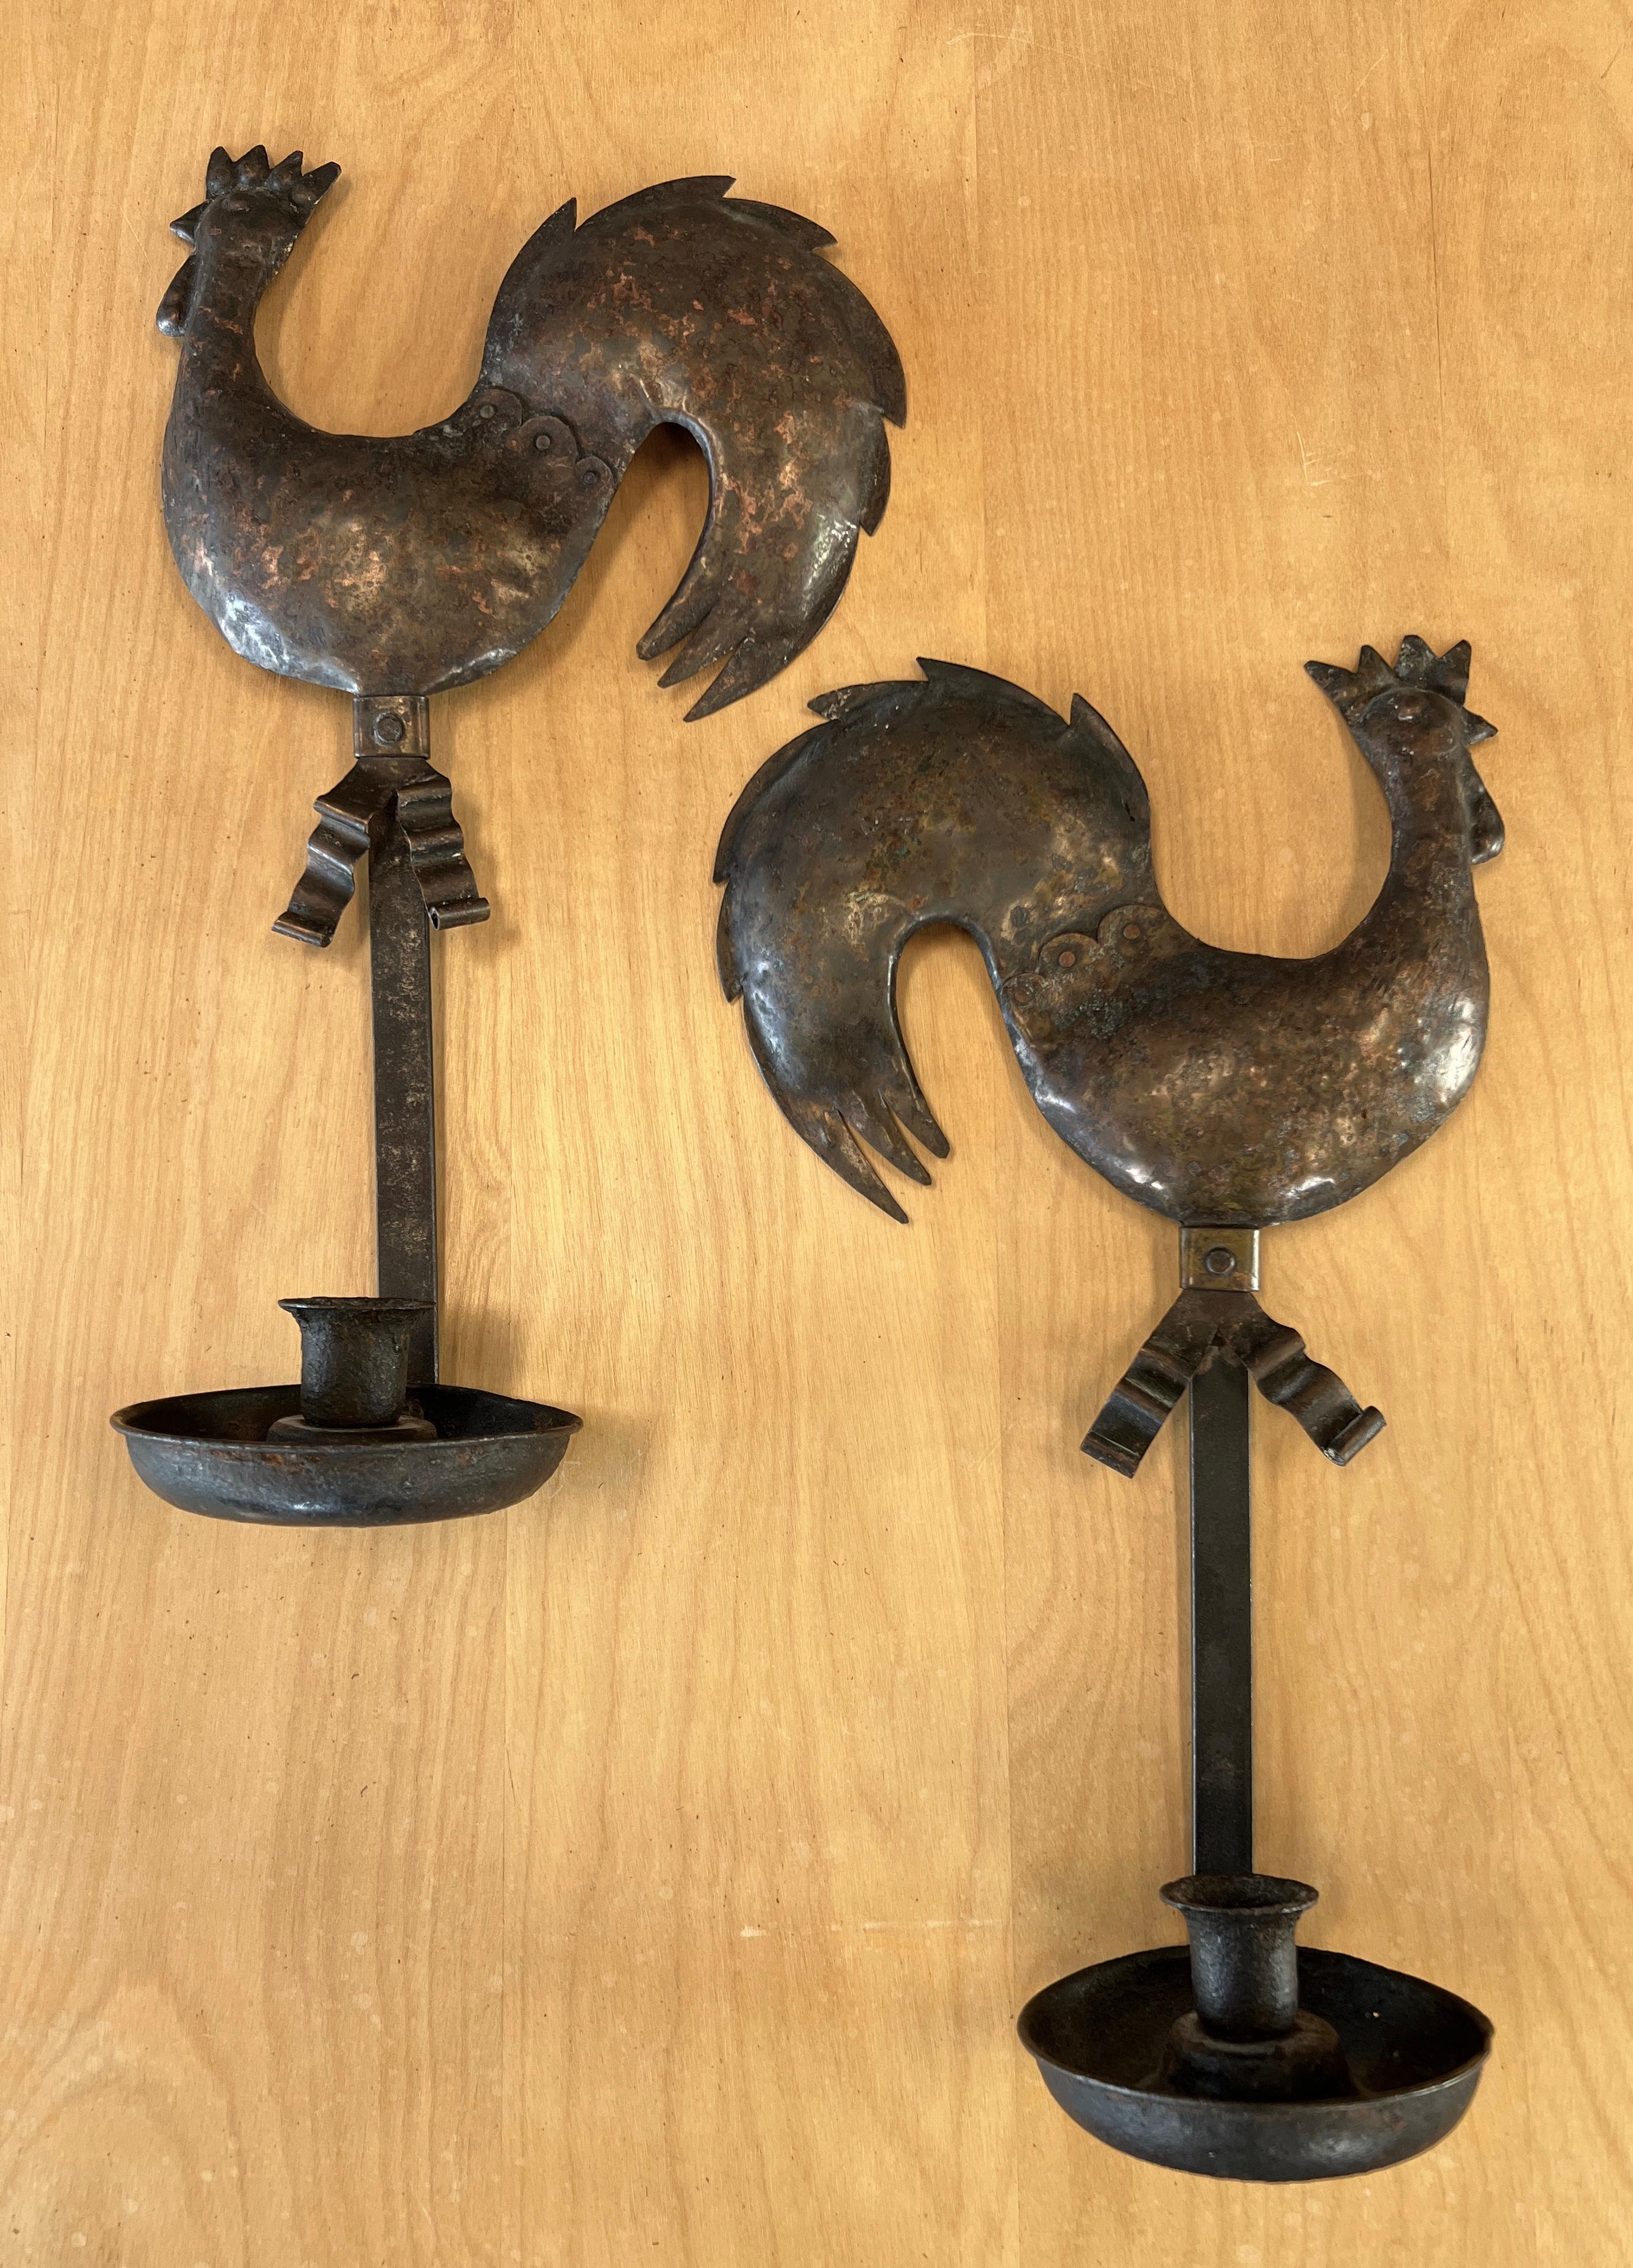 Offered here are a pair of handsome Arts and Crafts Gallic Rooster sconces.
They're both made out of hammered Copper. 
Candle holder with a flat hook shape bar goes around the holder and then up to hold the rooster. Right below
the roosters have